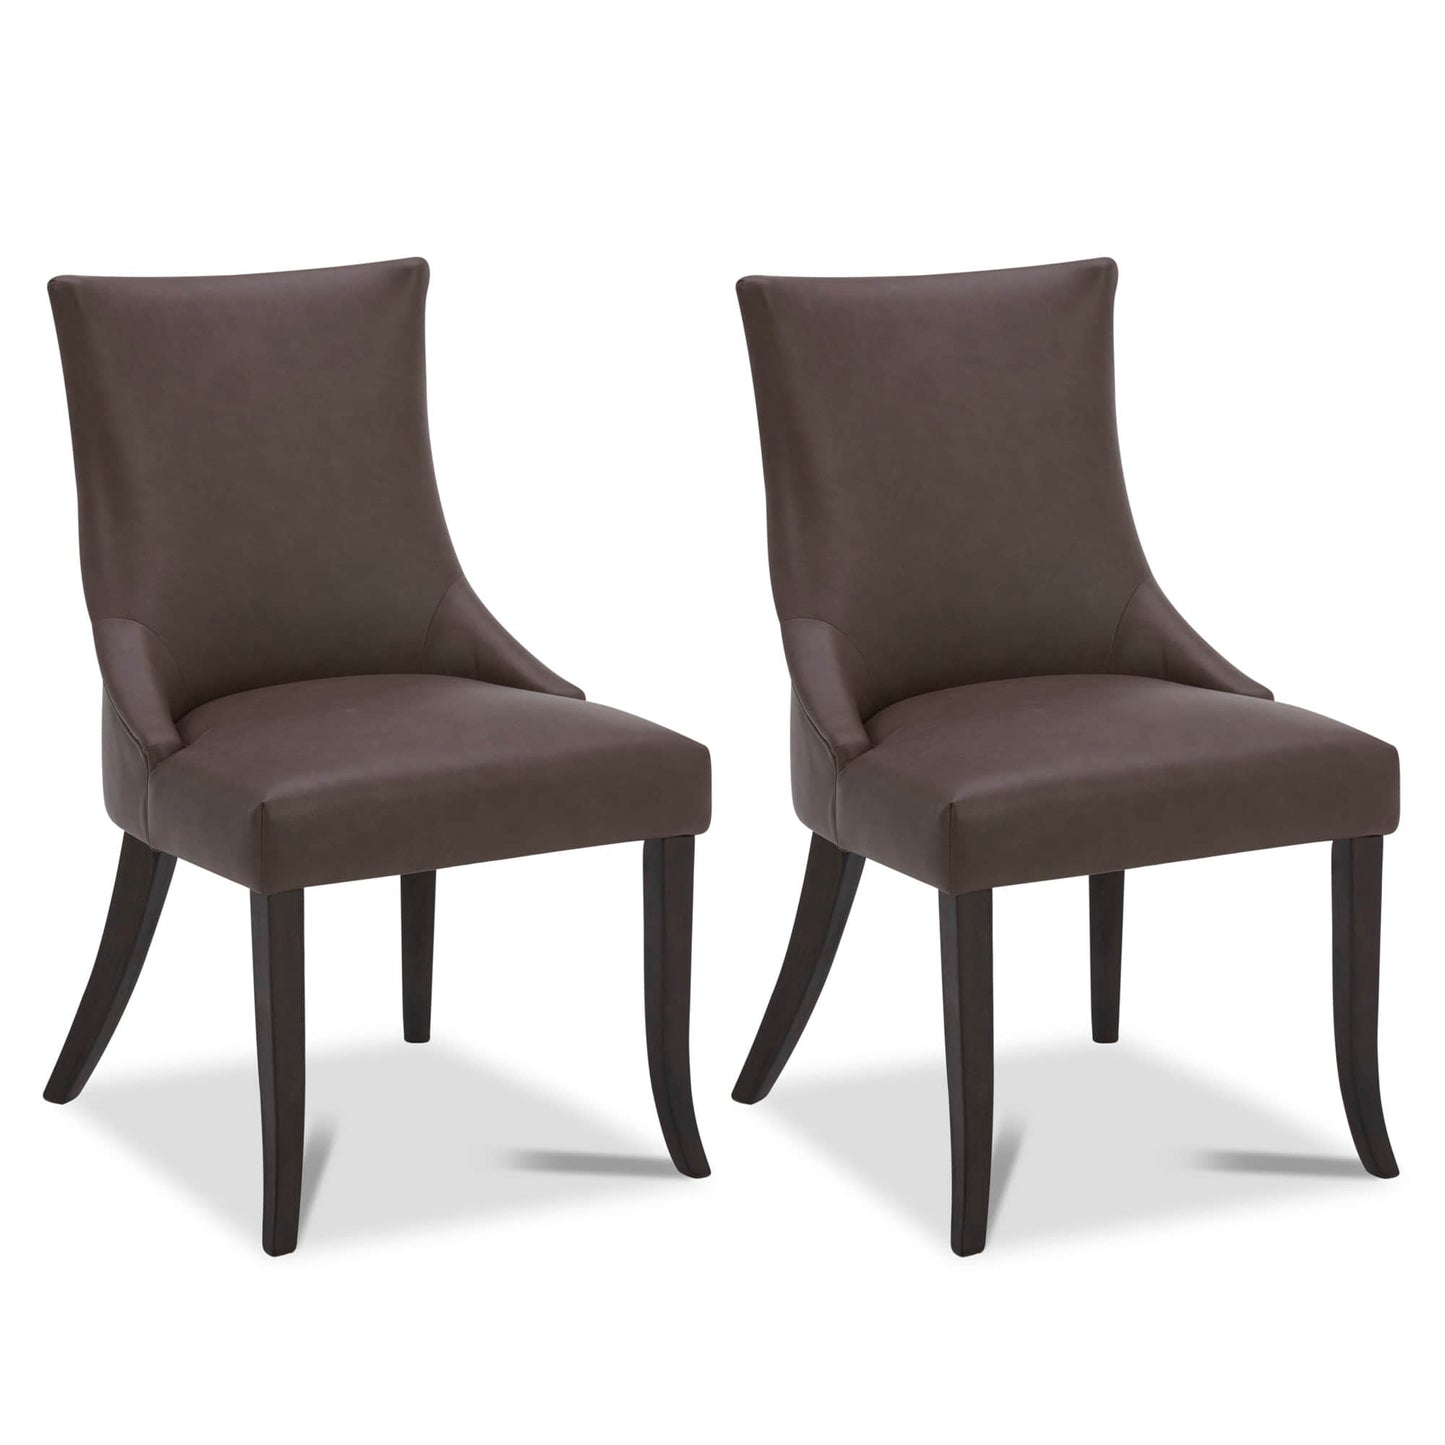 CHITA LIVING-Mia Romantic Dining Chair (Set of 2)-Dining Chairs-Faux Leather-Chocolate-